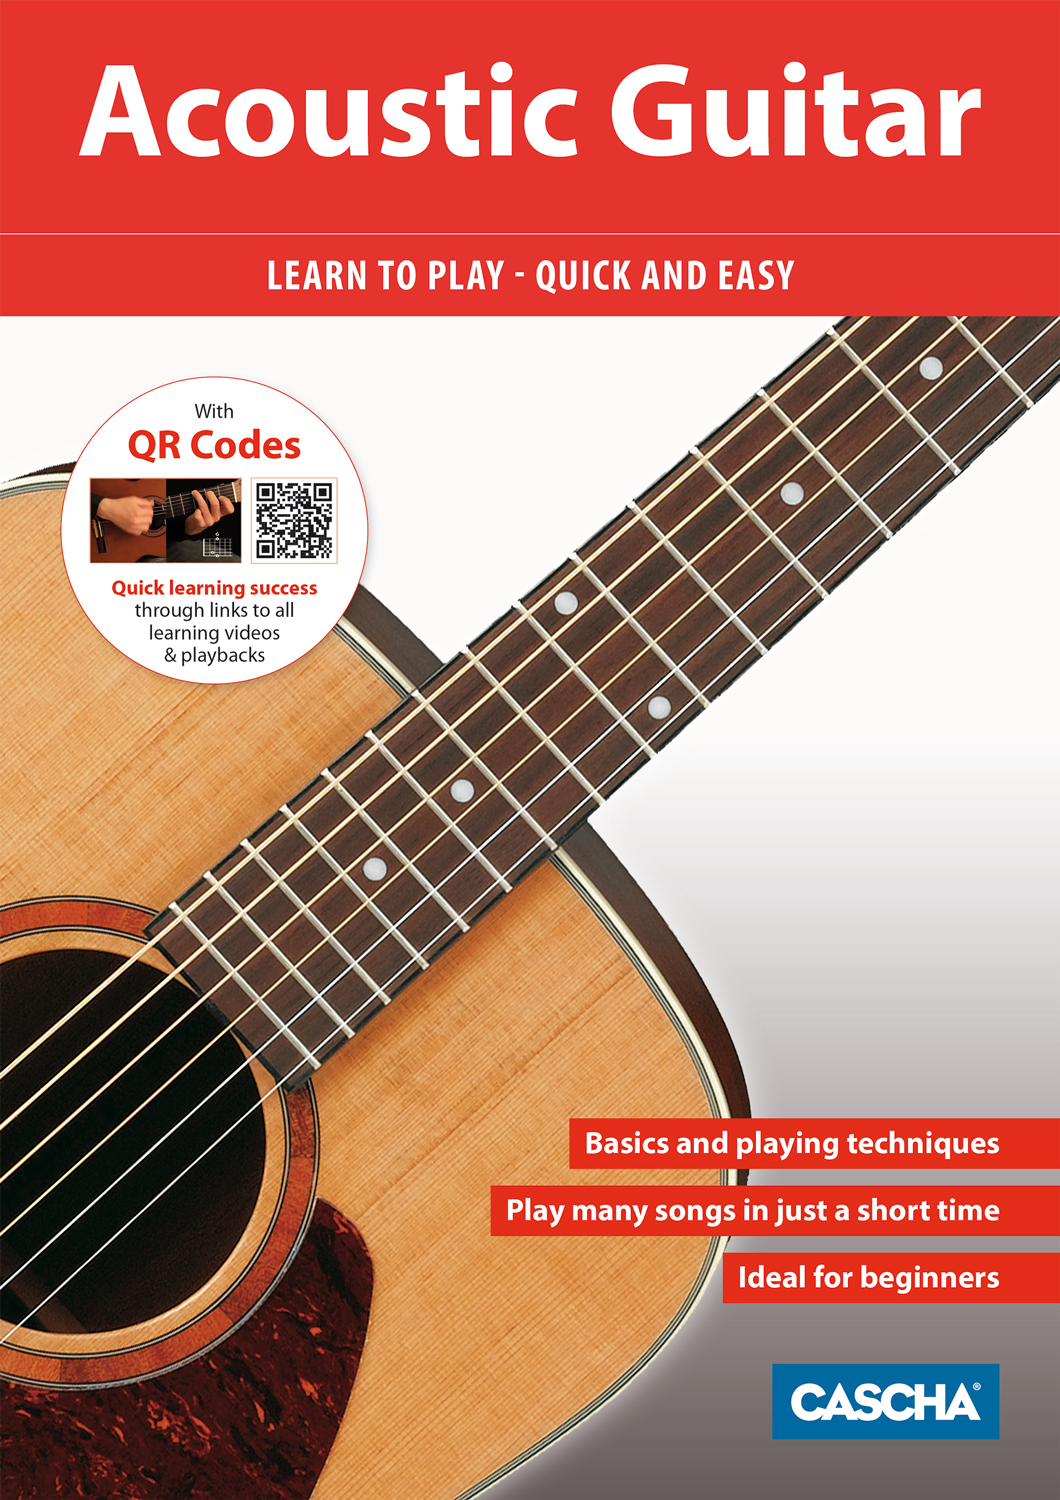 Acoustic Guitar - Learn to play quick and easy